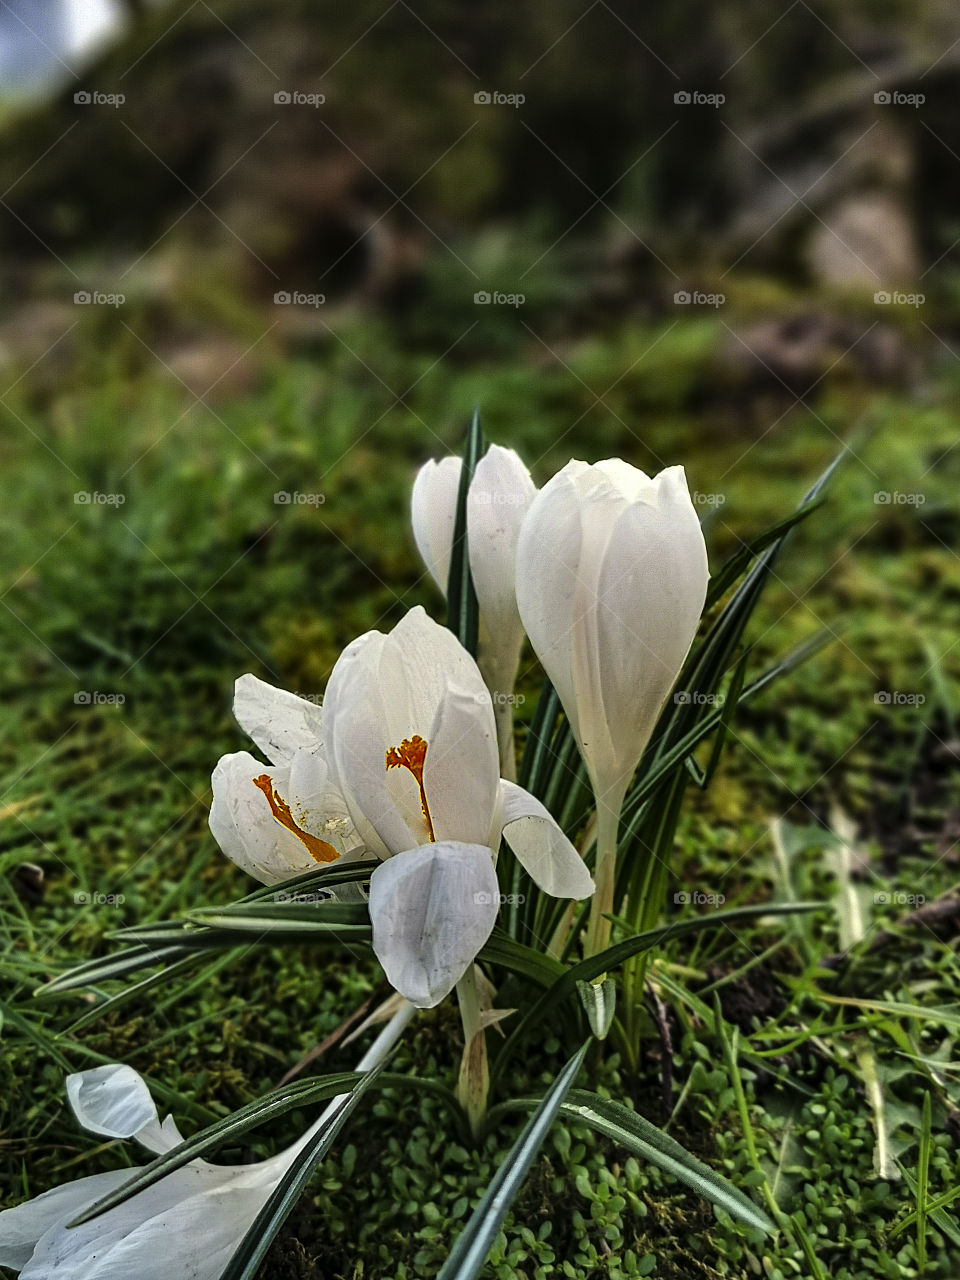 White crocuses. Crocus is one of the first spring flower